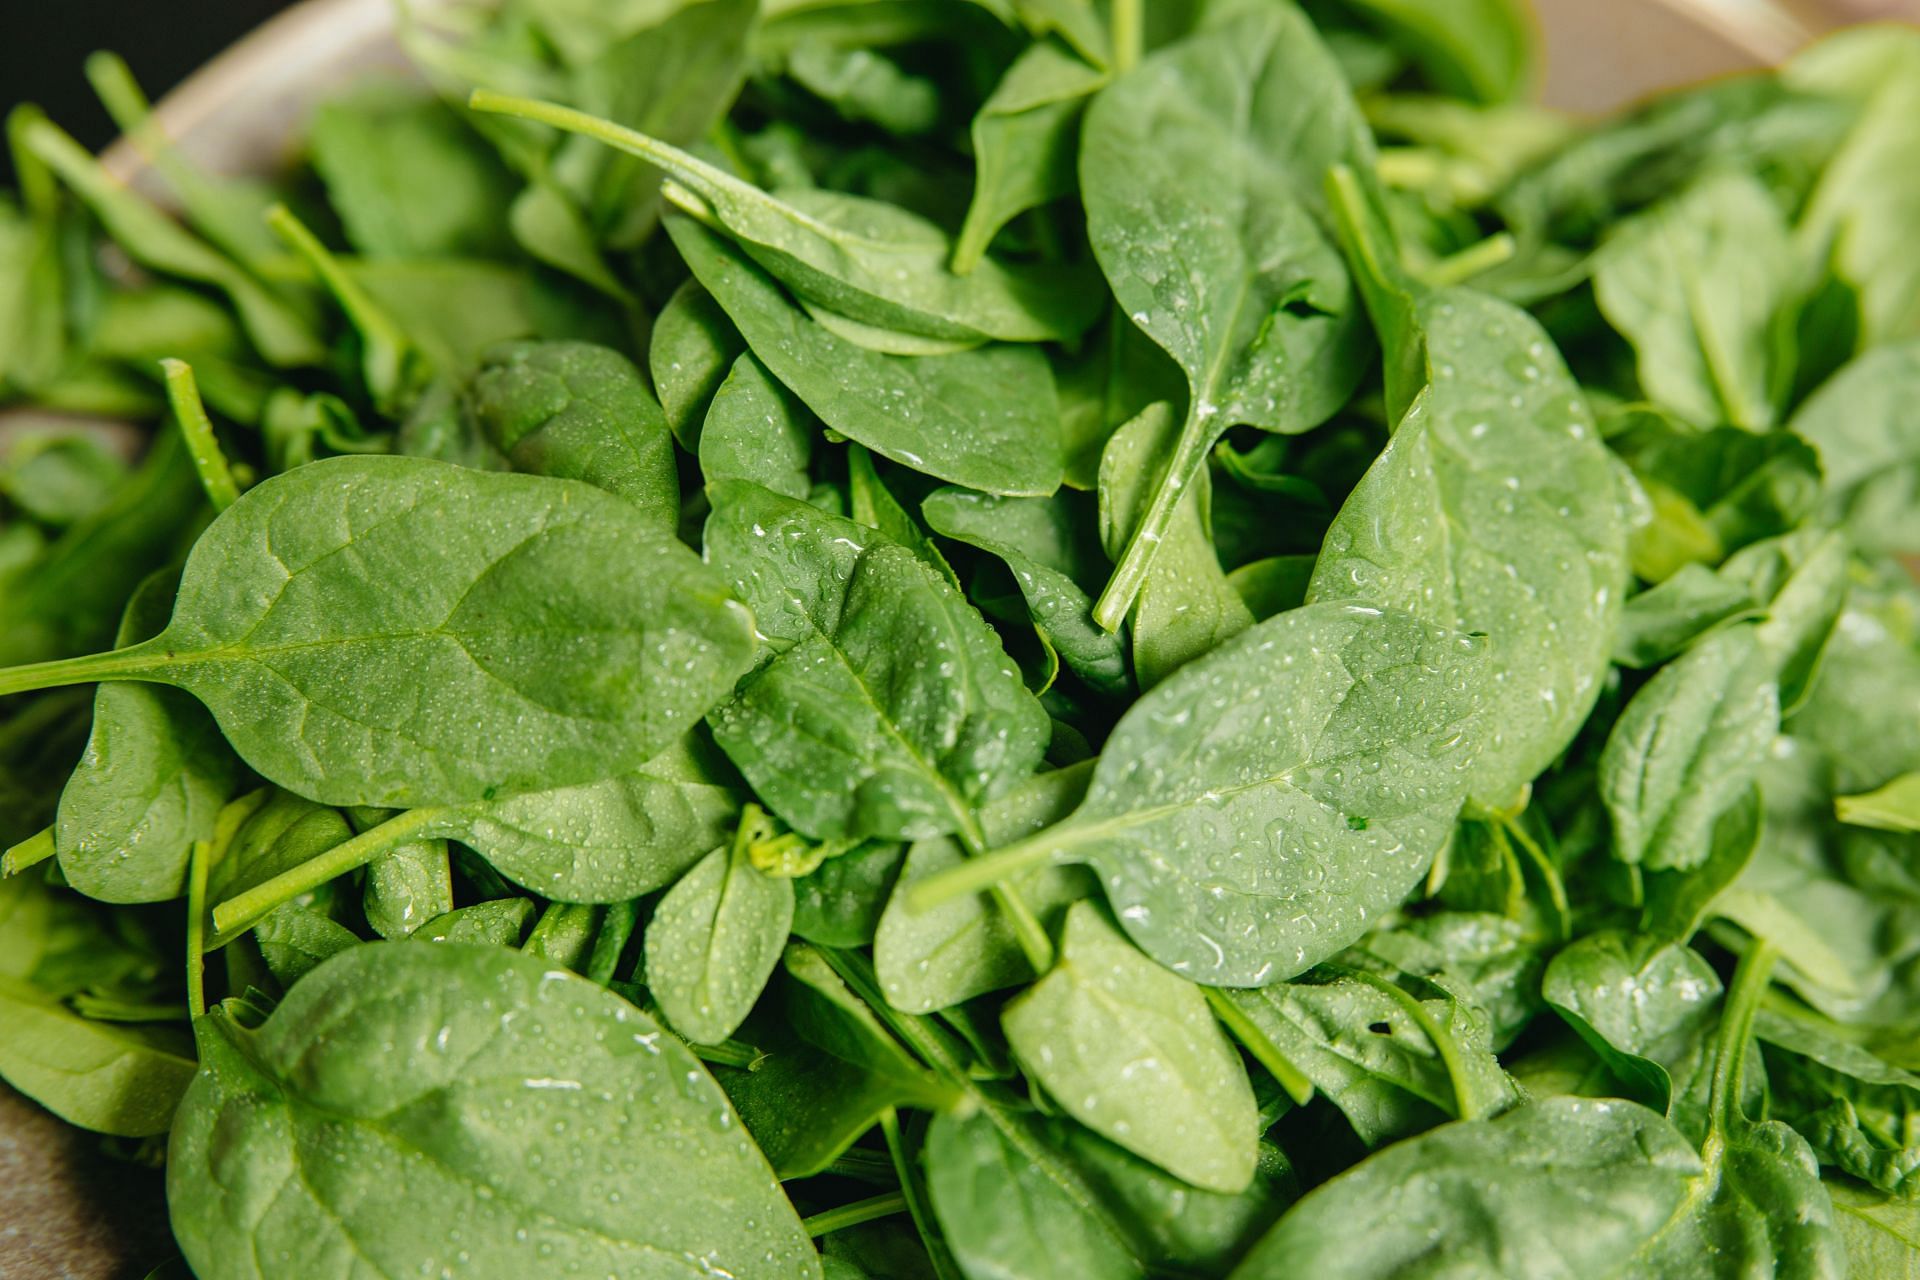 Green leafy veggies are a must for post-workout recovery (Image by Yaroslav Shuraev / Pexels)